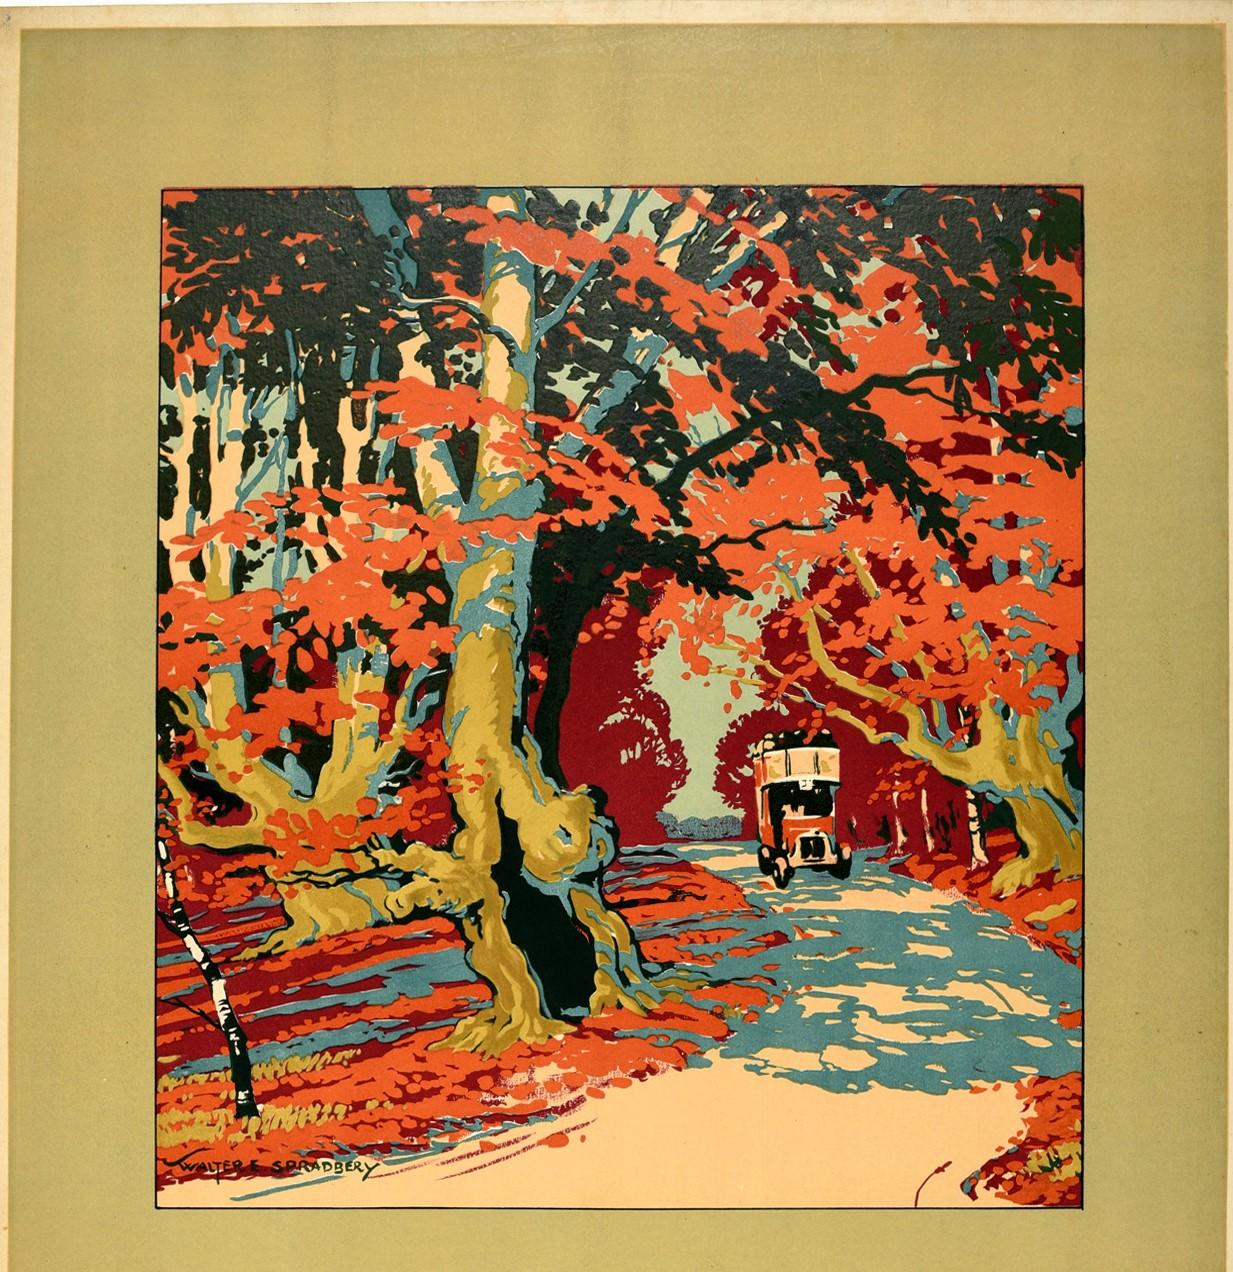 Original vintage London Transport poster for Burnham Beeches by Motor Bus featuring great artwork by the notable British artist Walter E. Spradbery (1889-1969) of an iconic red London bus driving towards the viewer along a road lined with autumn